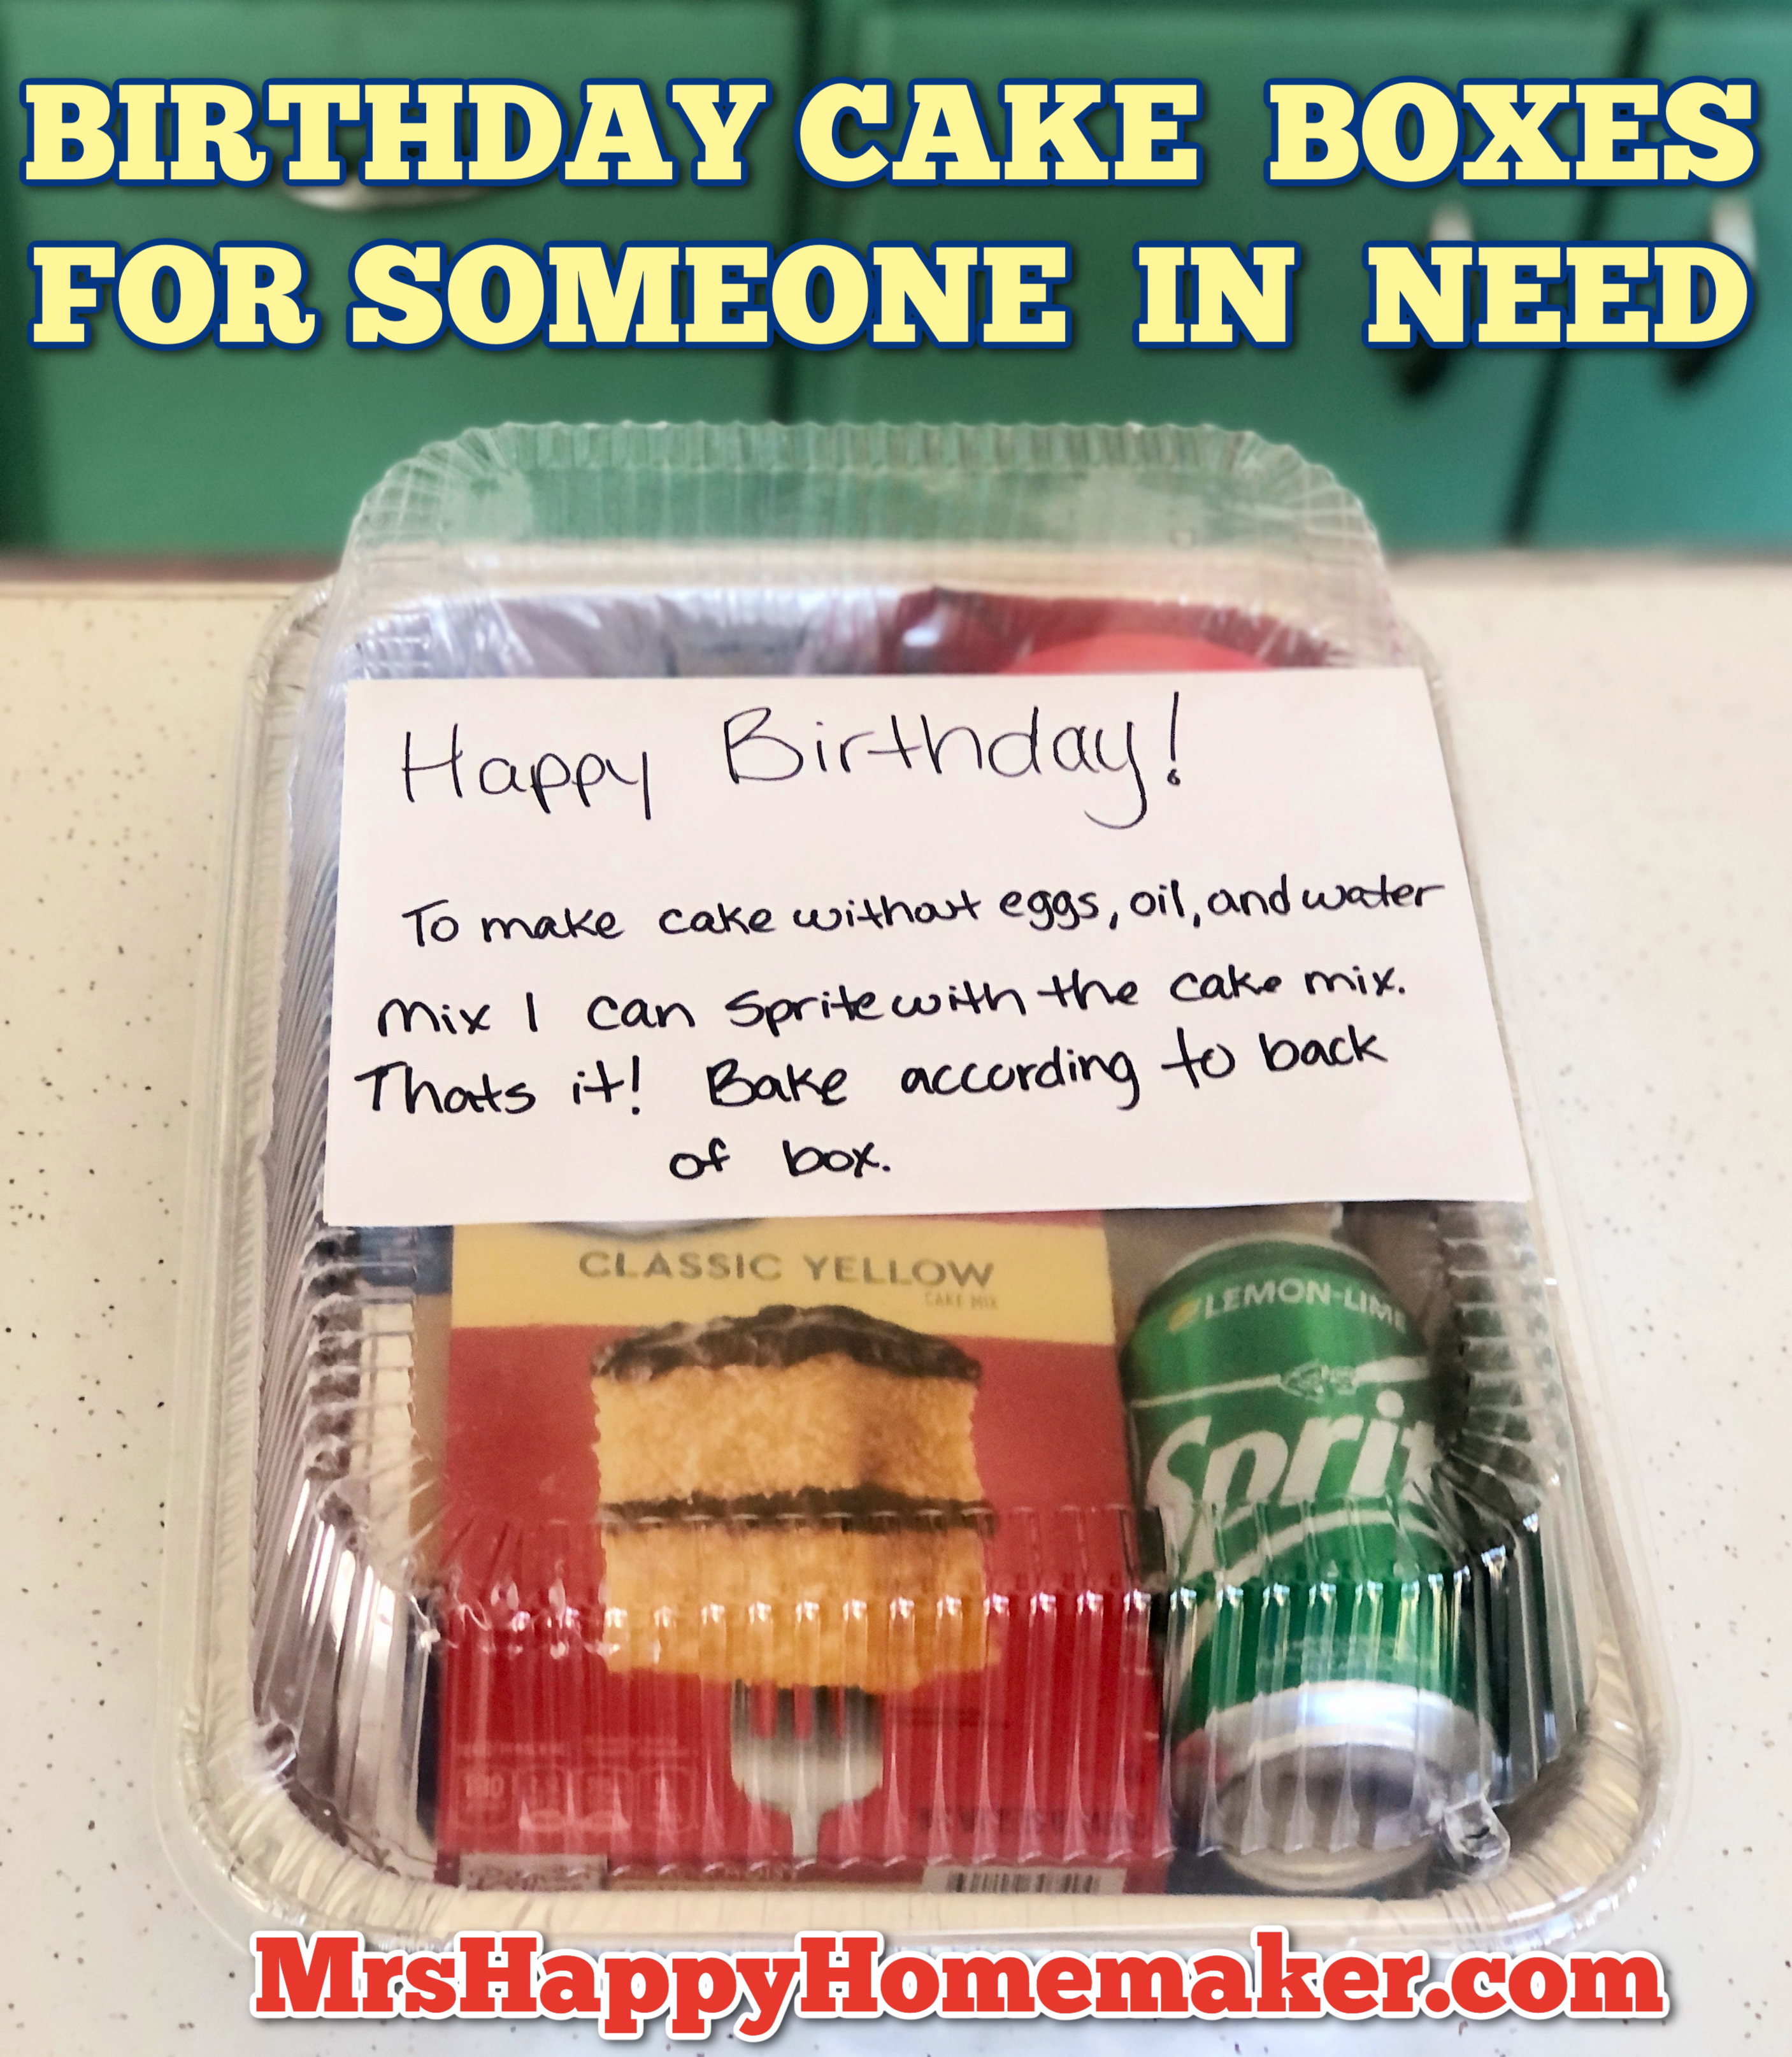 Birthday Cake Boxes for People in Need image